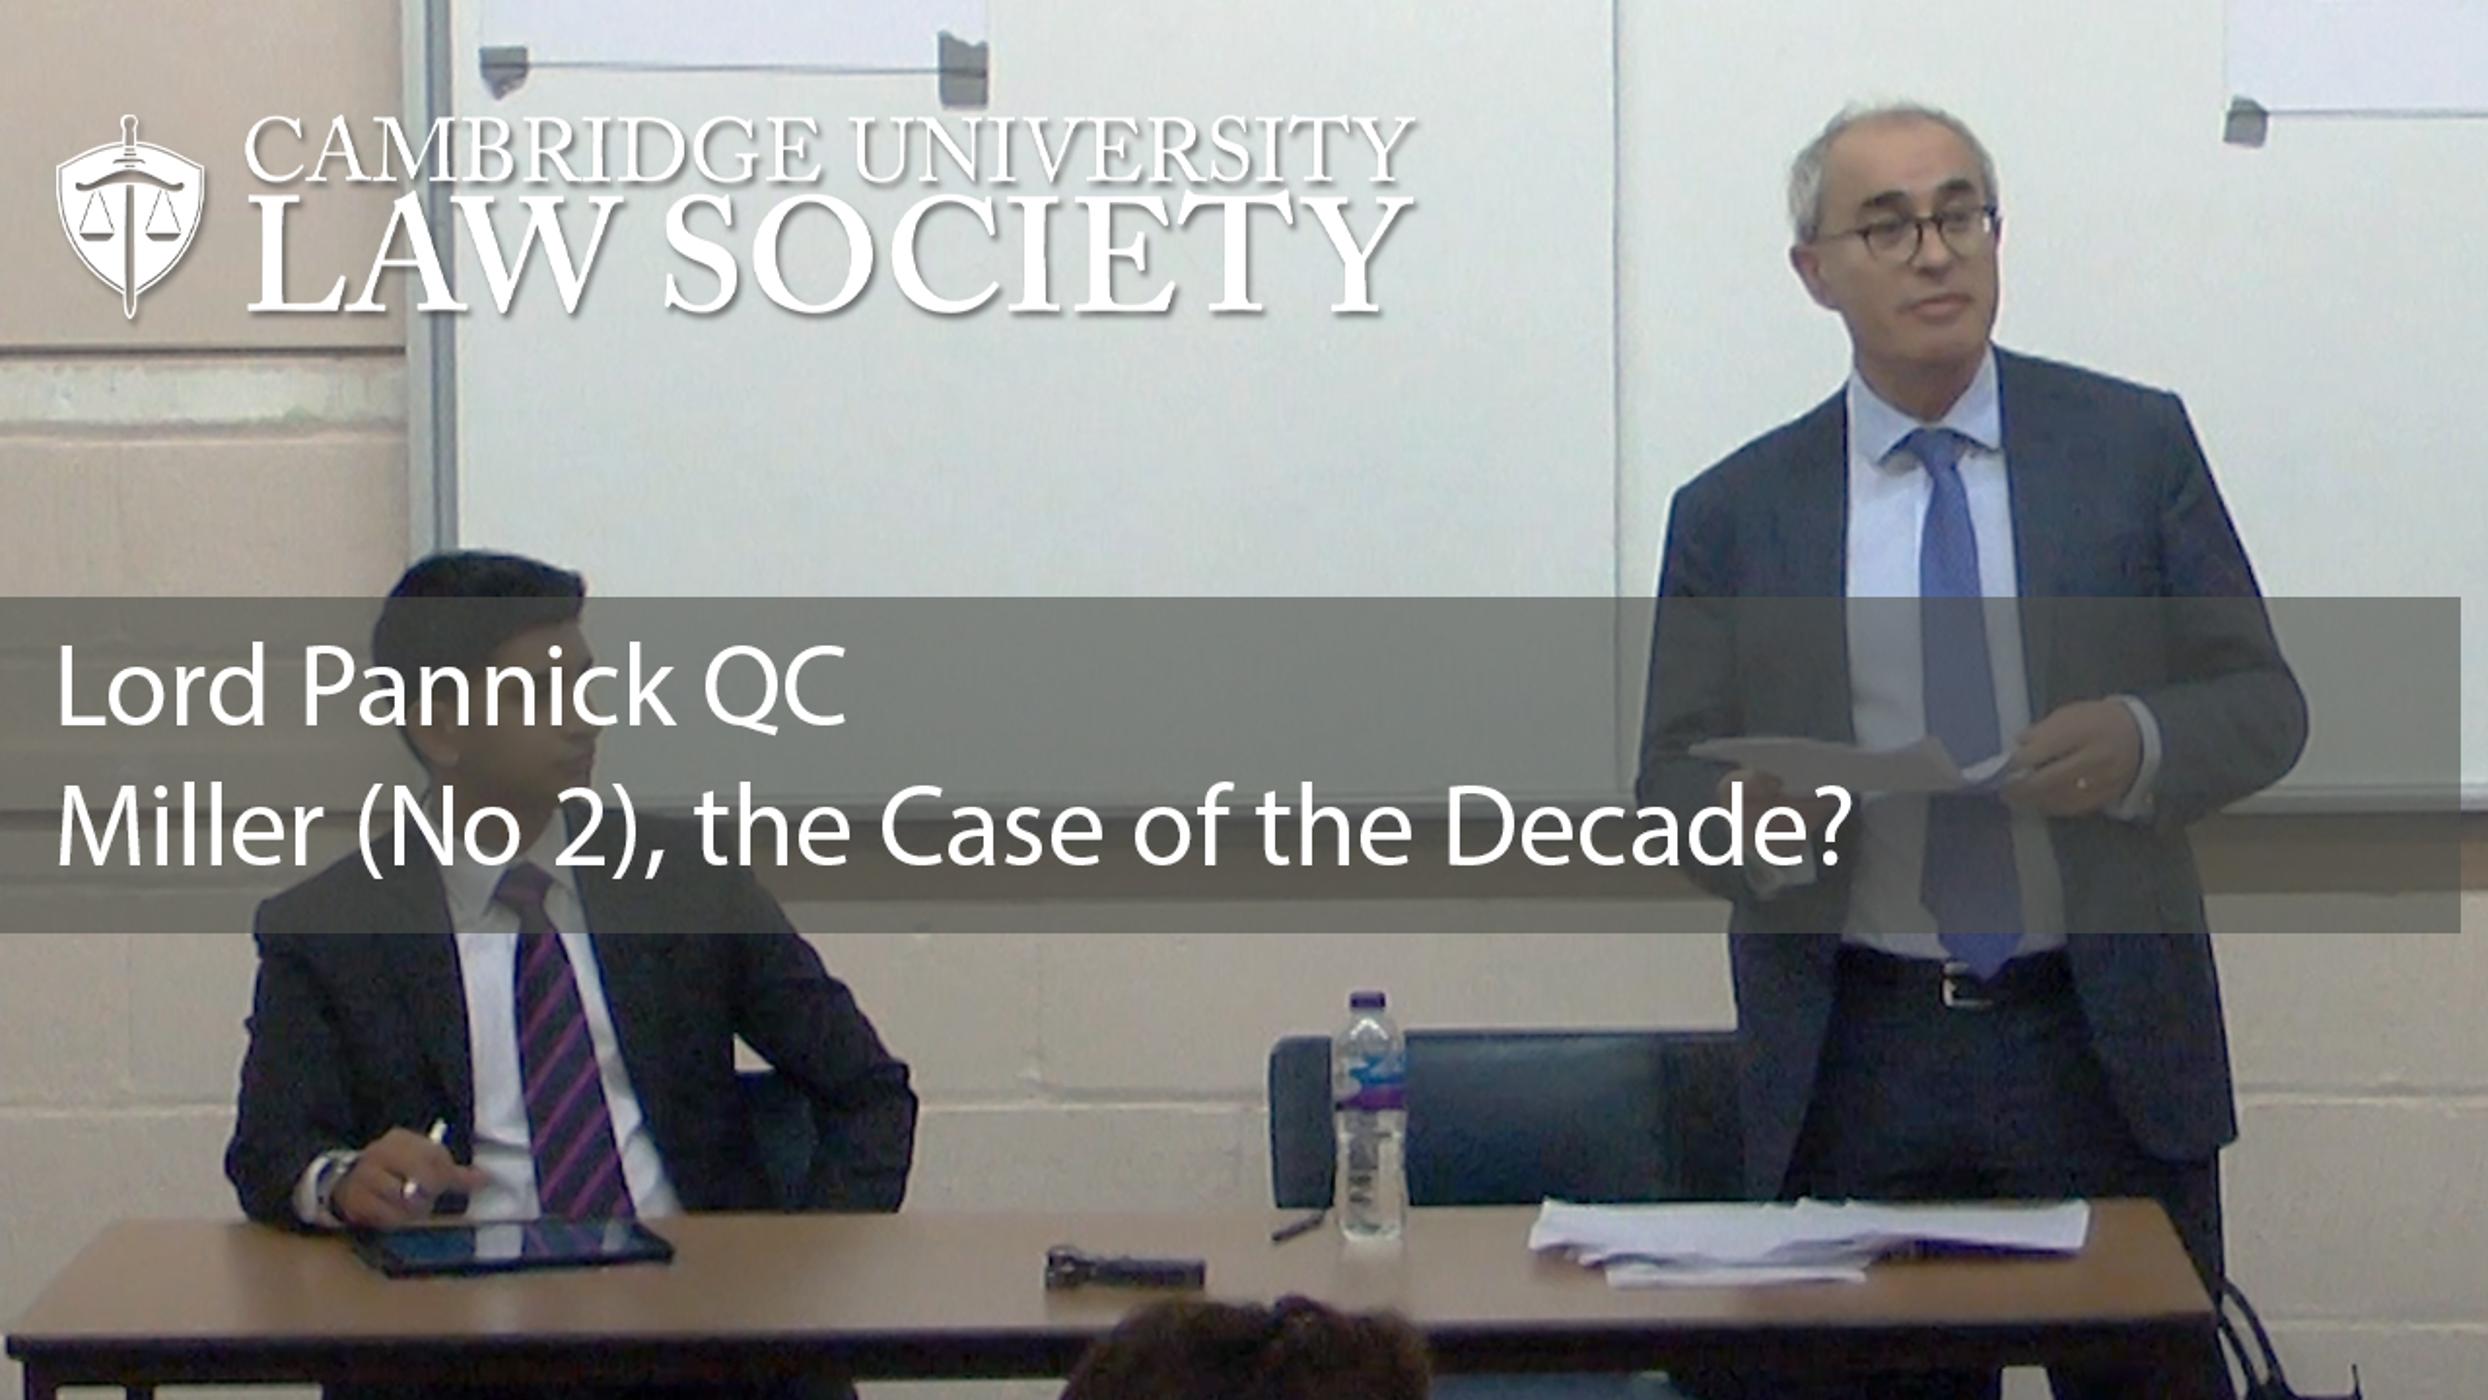 'Miller (No 2), the Case of the Decade?' - Lord Pannick QC: CULS Lecture